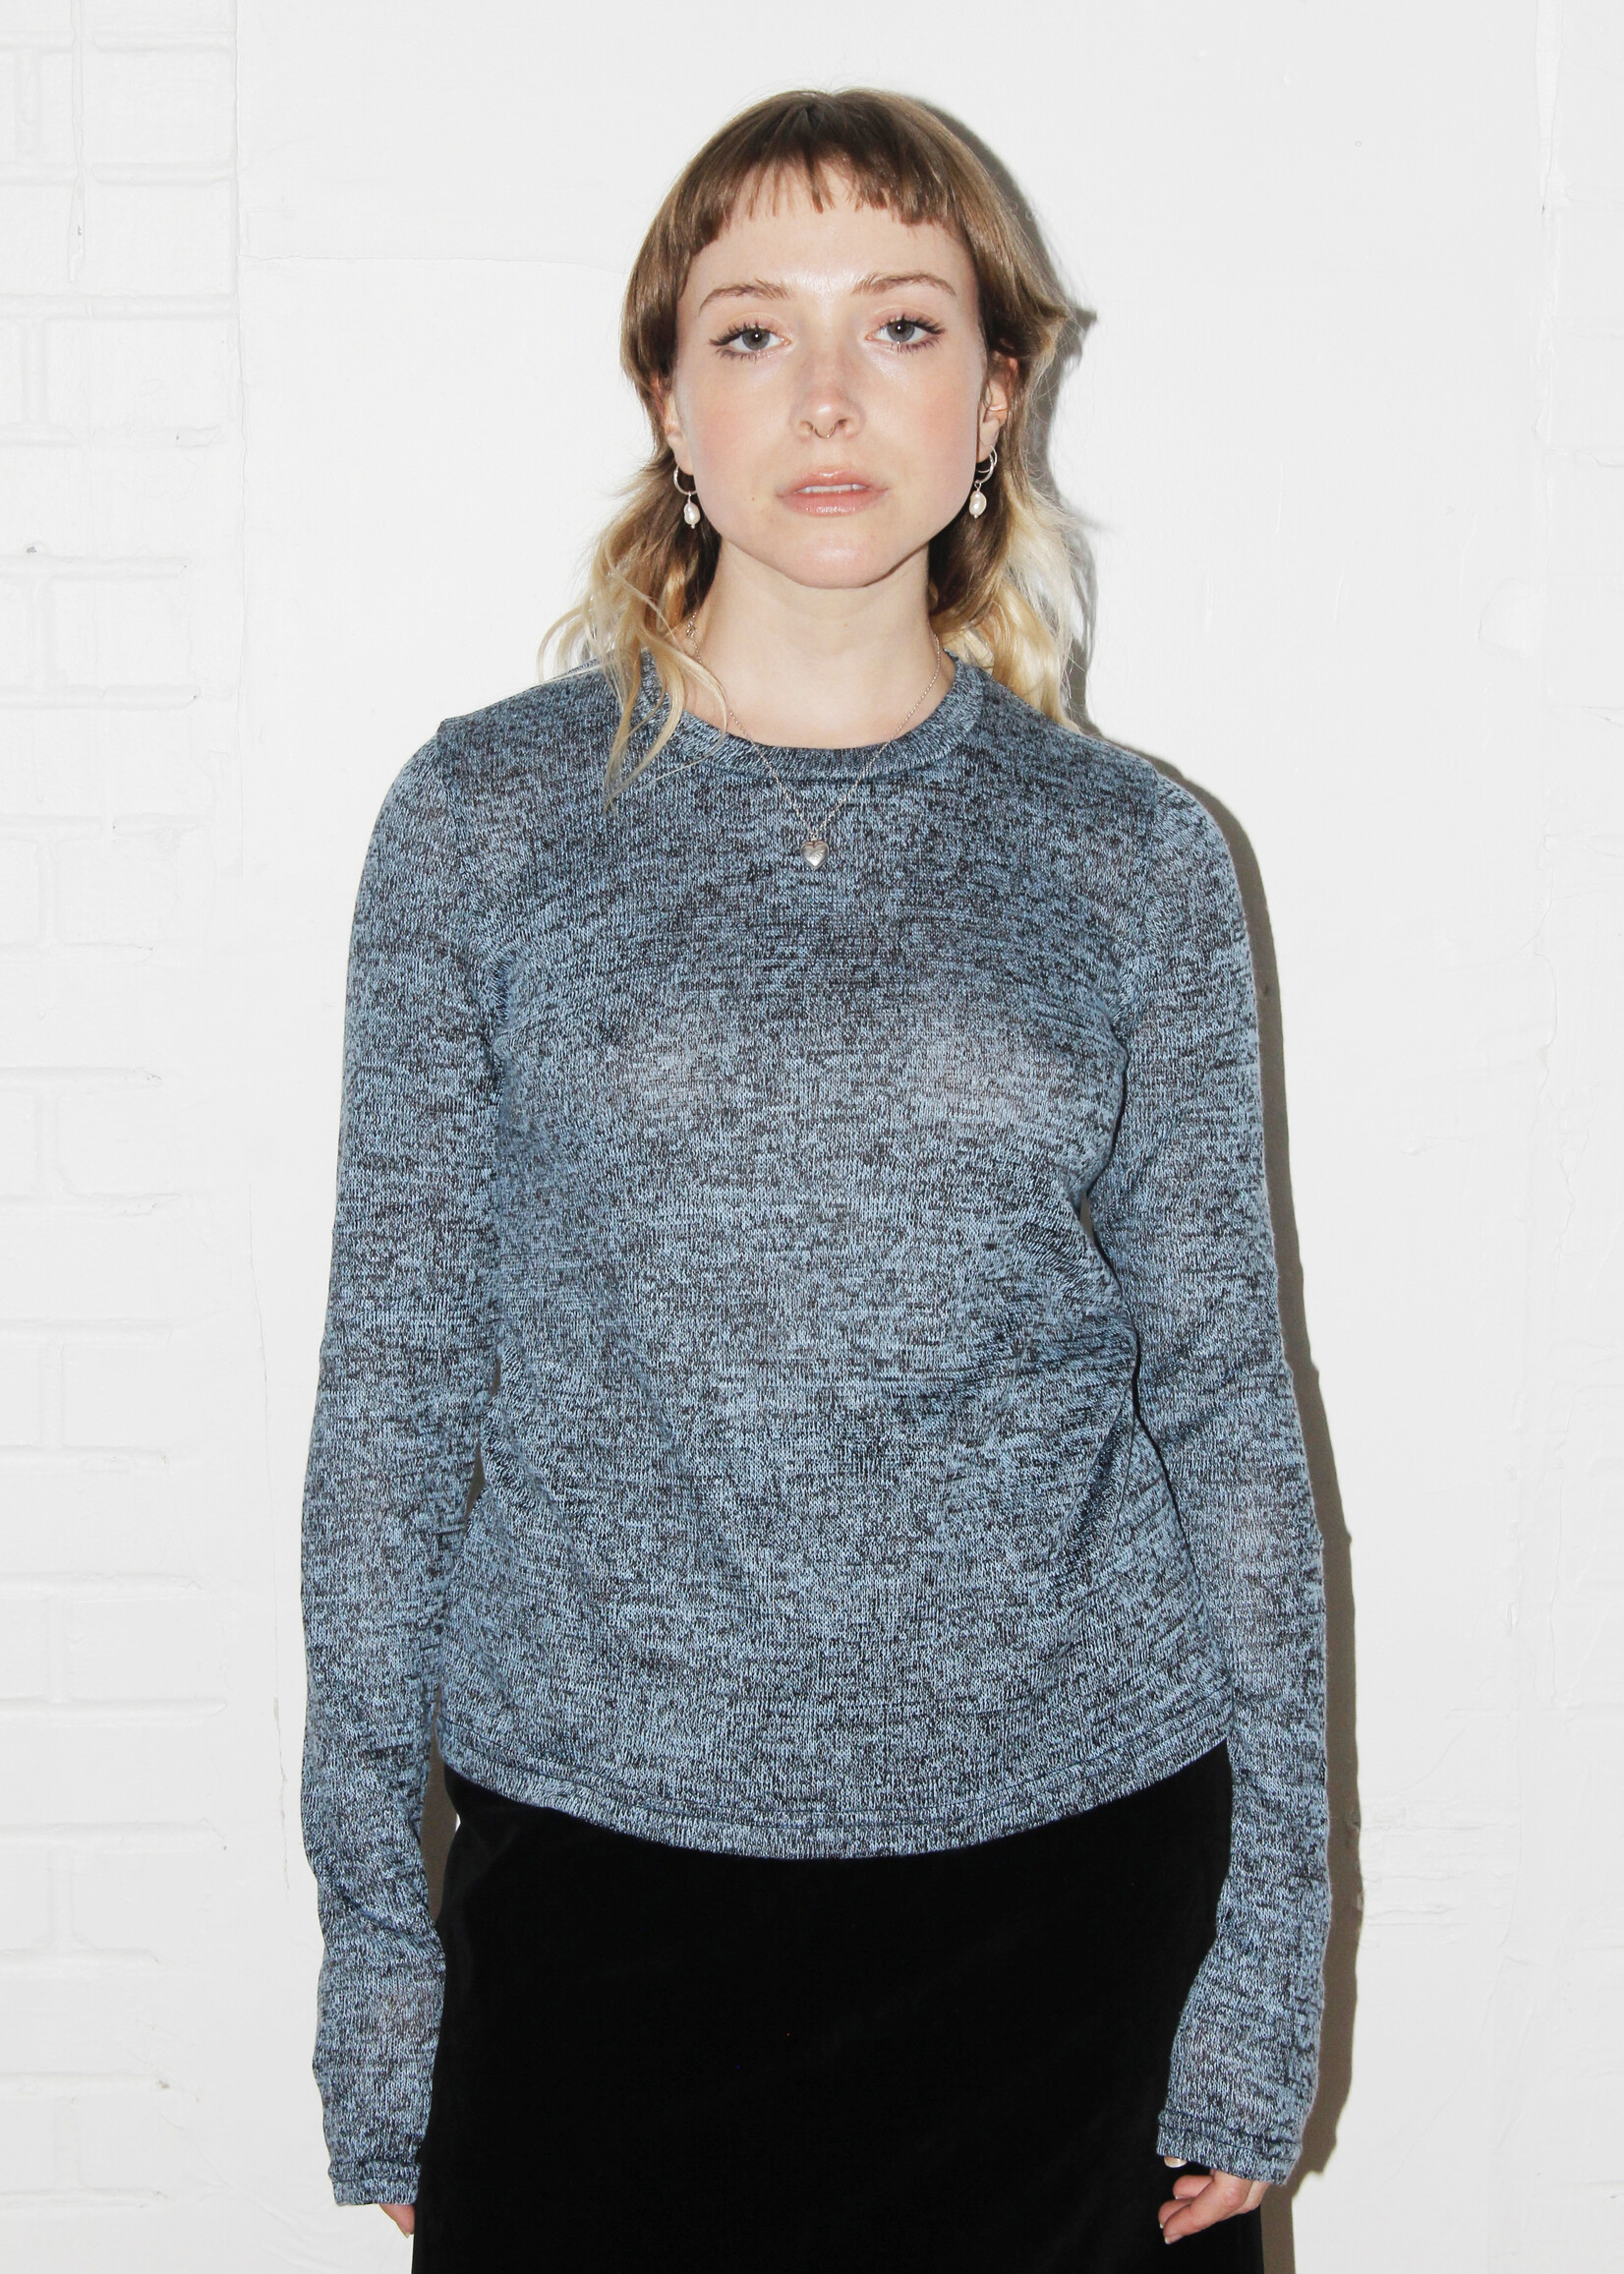 Studio Citizen Studio Citizen Long Fitted Top in Blue and Black Marled Knit  Available at our Mile End Shop!!  Email to order